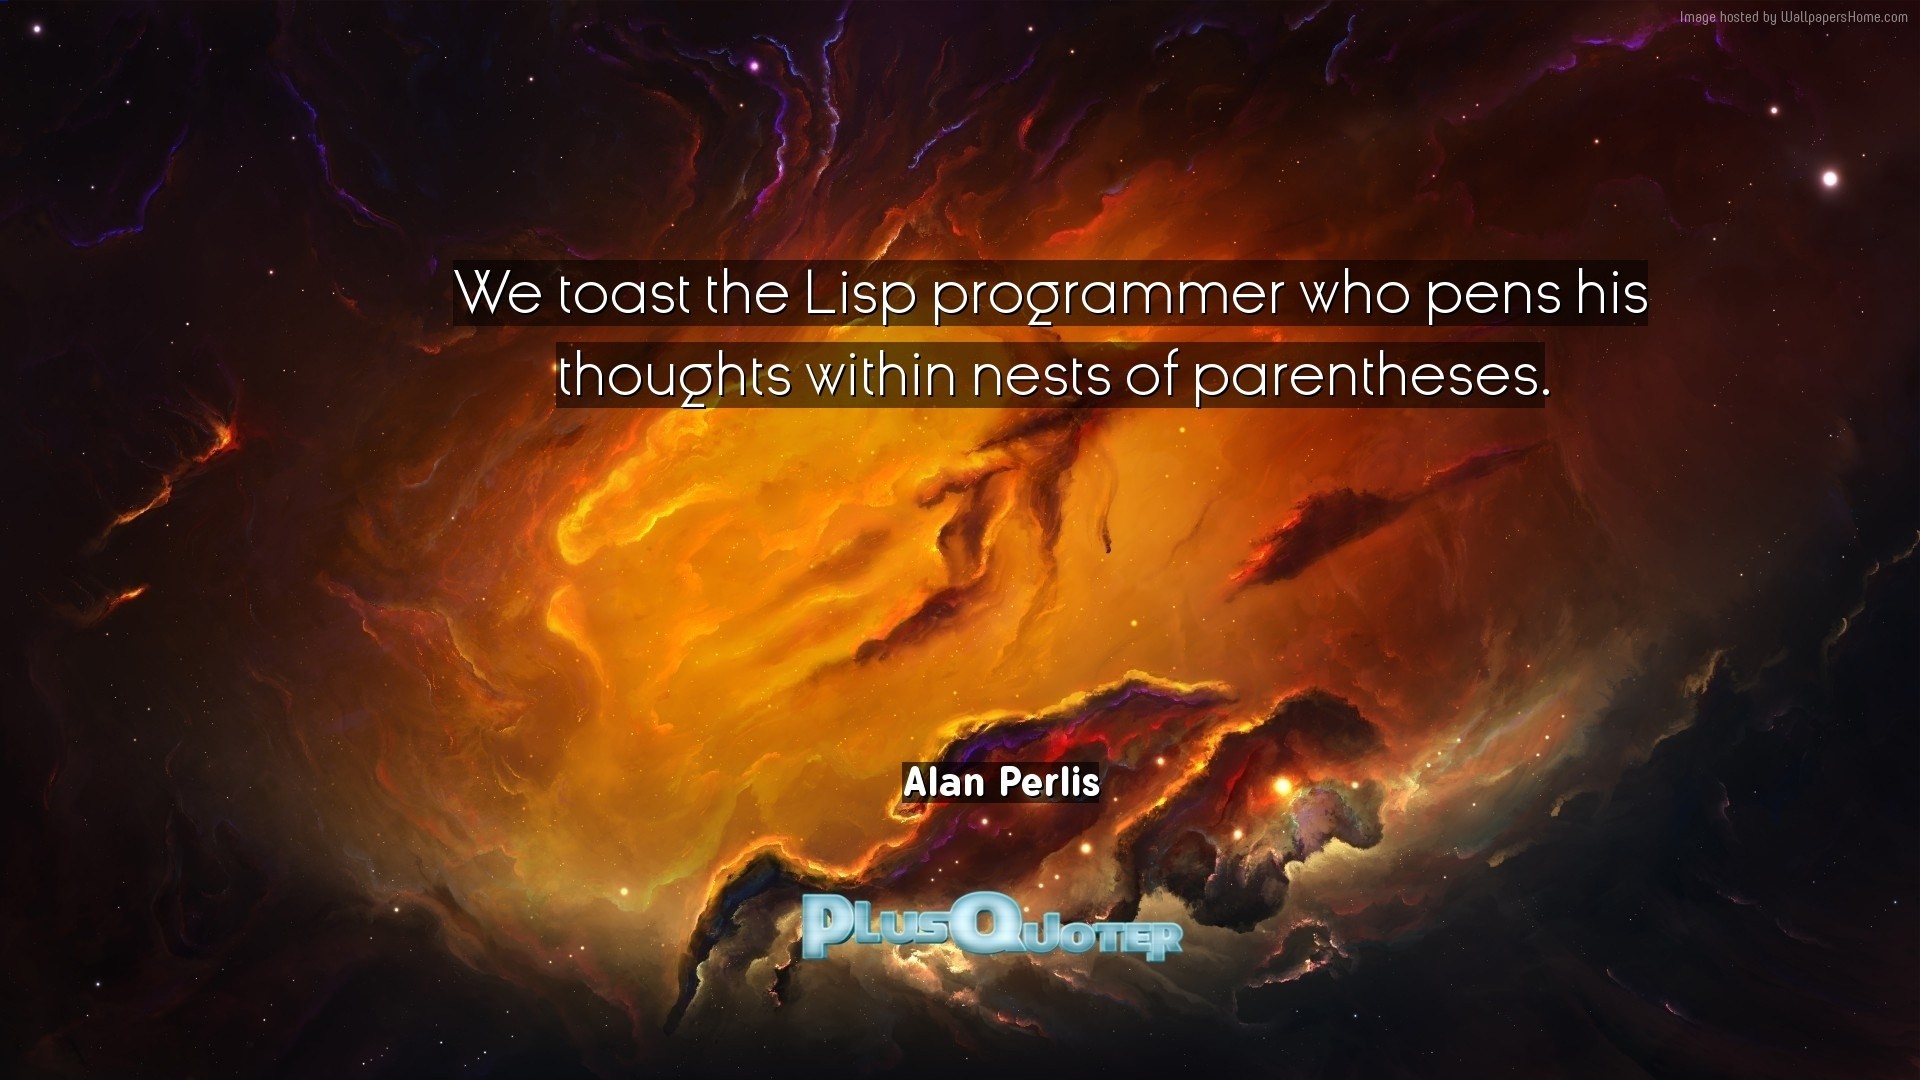 1920x1080 Download Wallpaper with inspirational Quotes- "We toast the Lisp programmer  who pens his thoughts